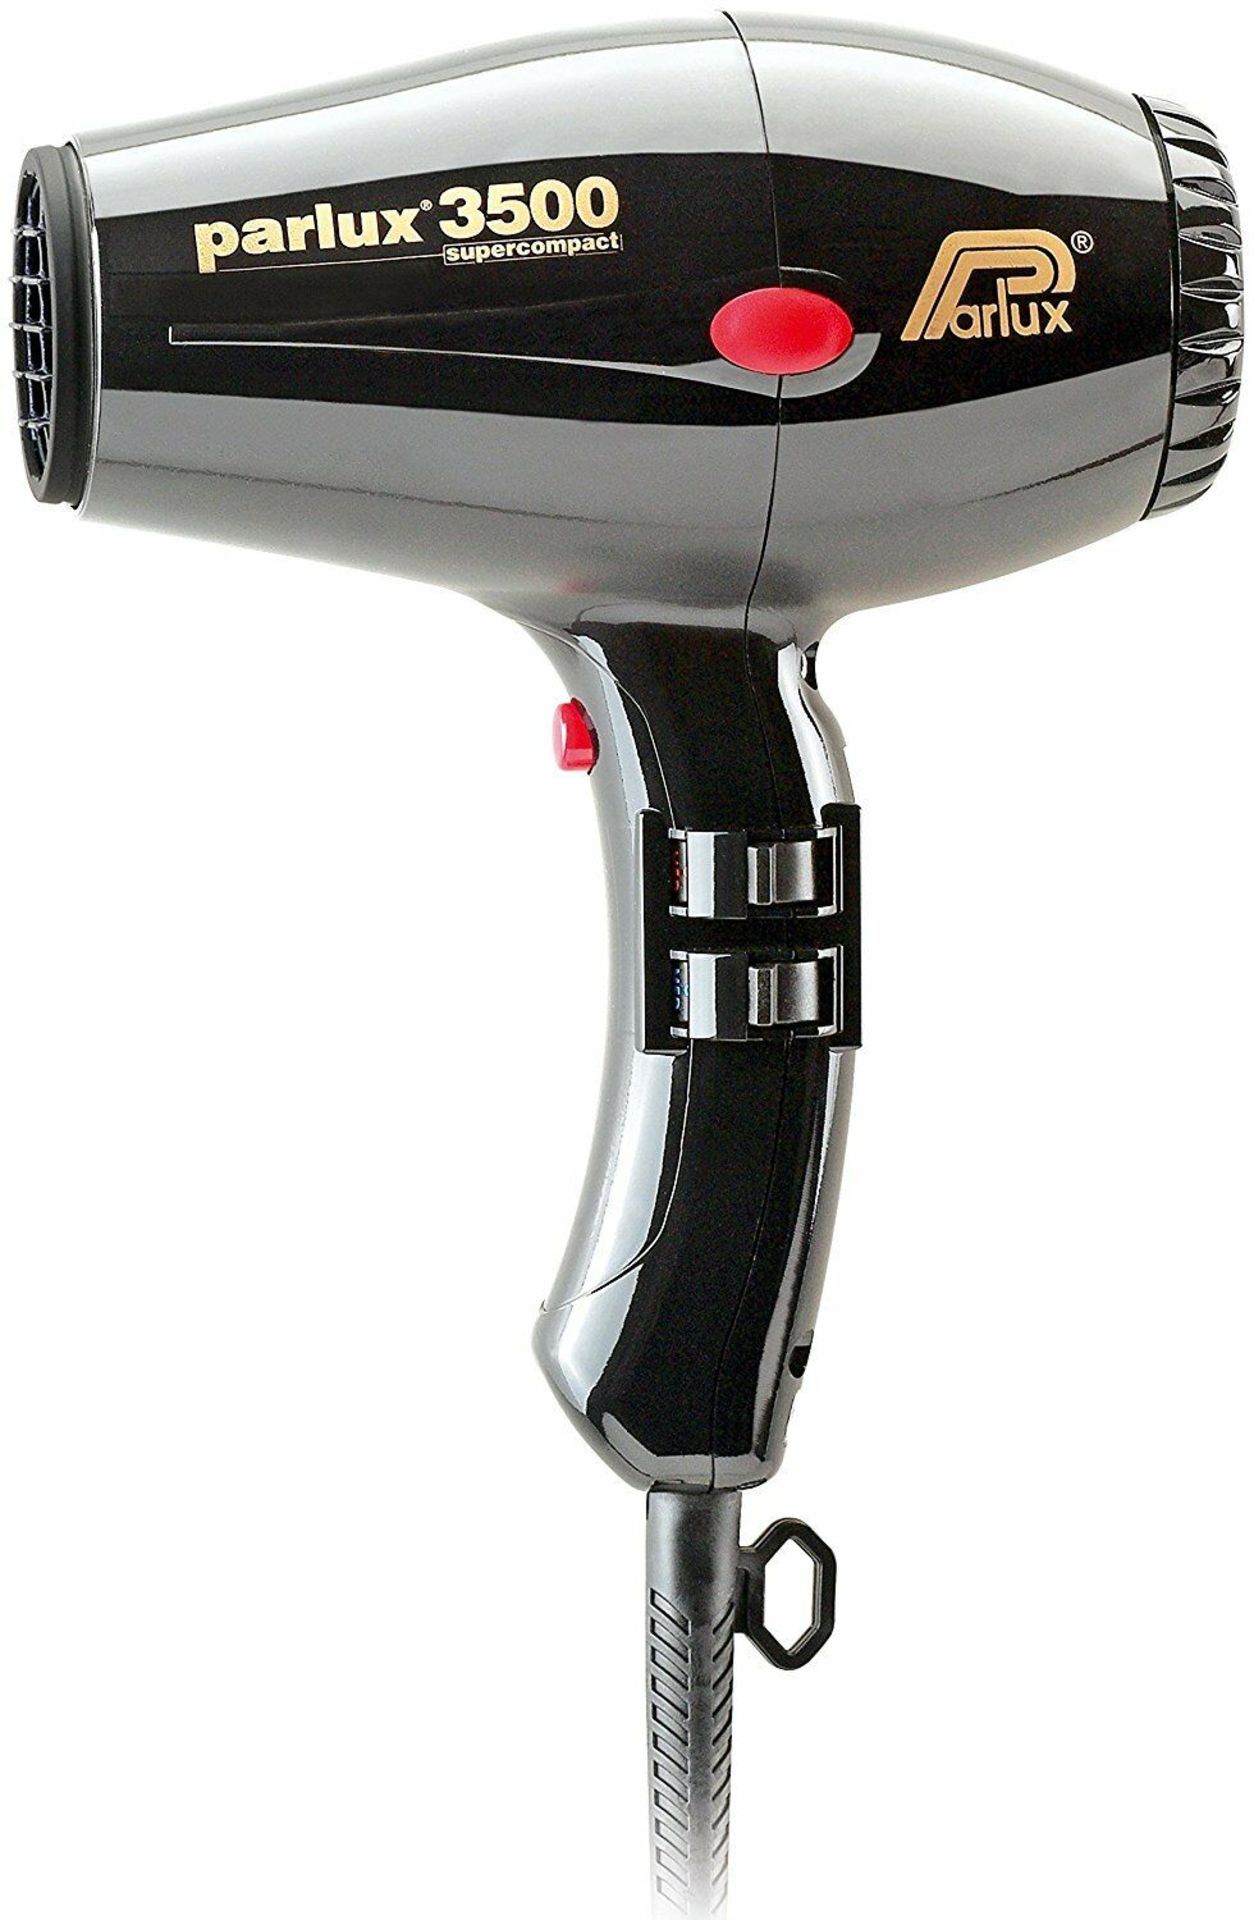 Parlux 3500 Supercompact Professional Hairdryer RRP £249 - Ex Demo or Surplus Stock from Private... - Image 2 of 11